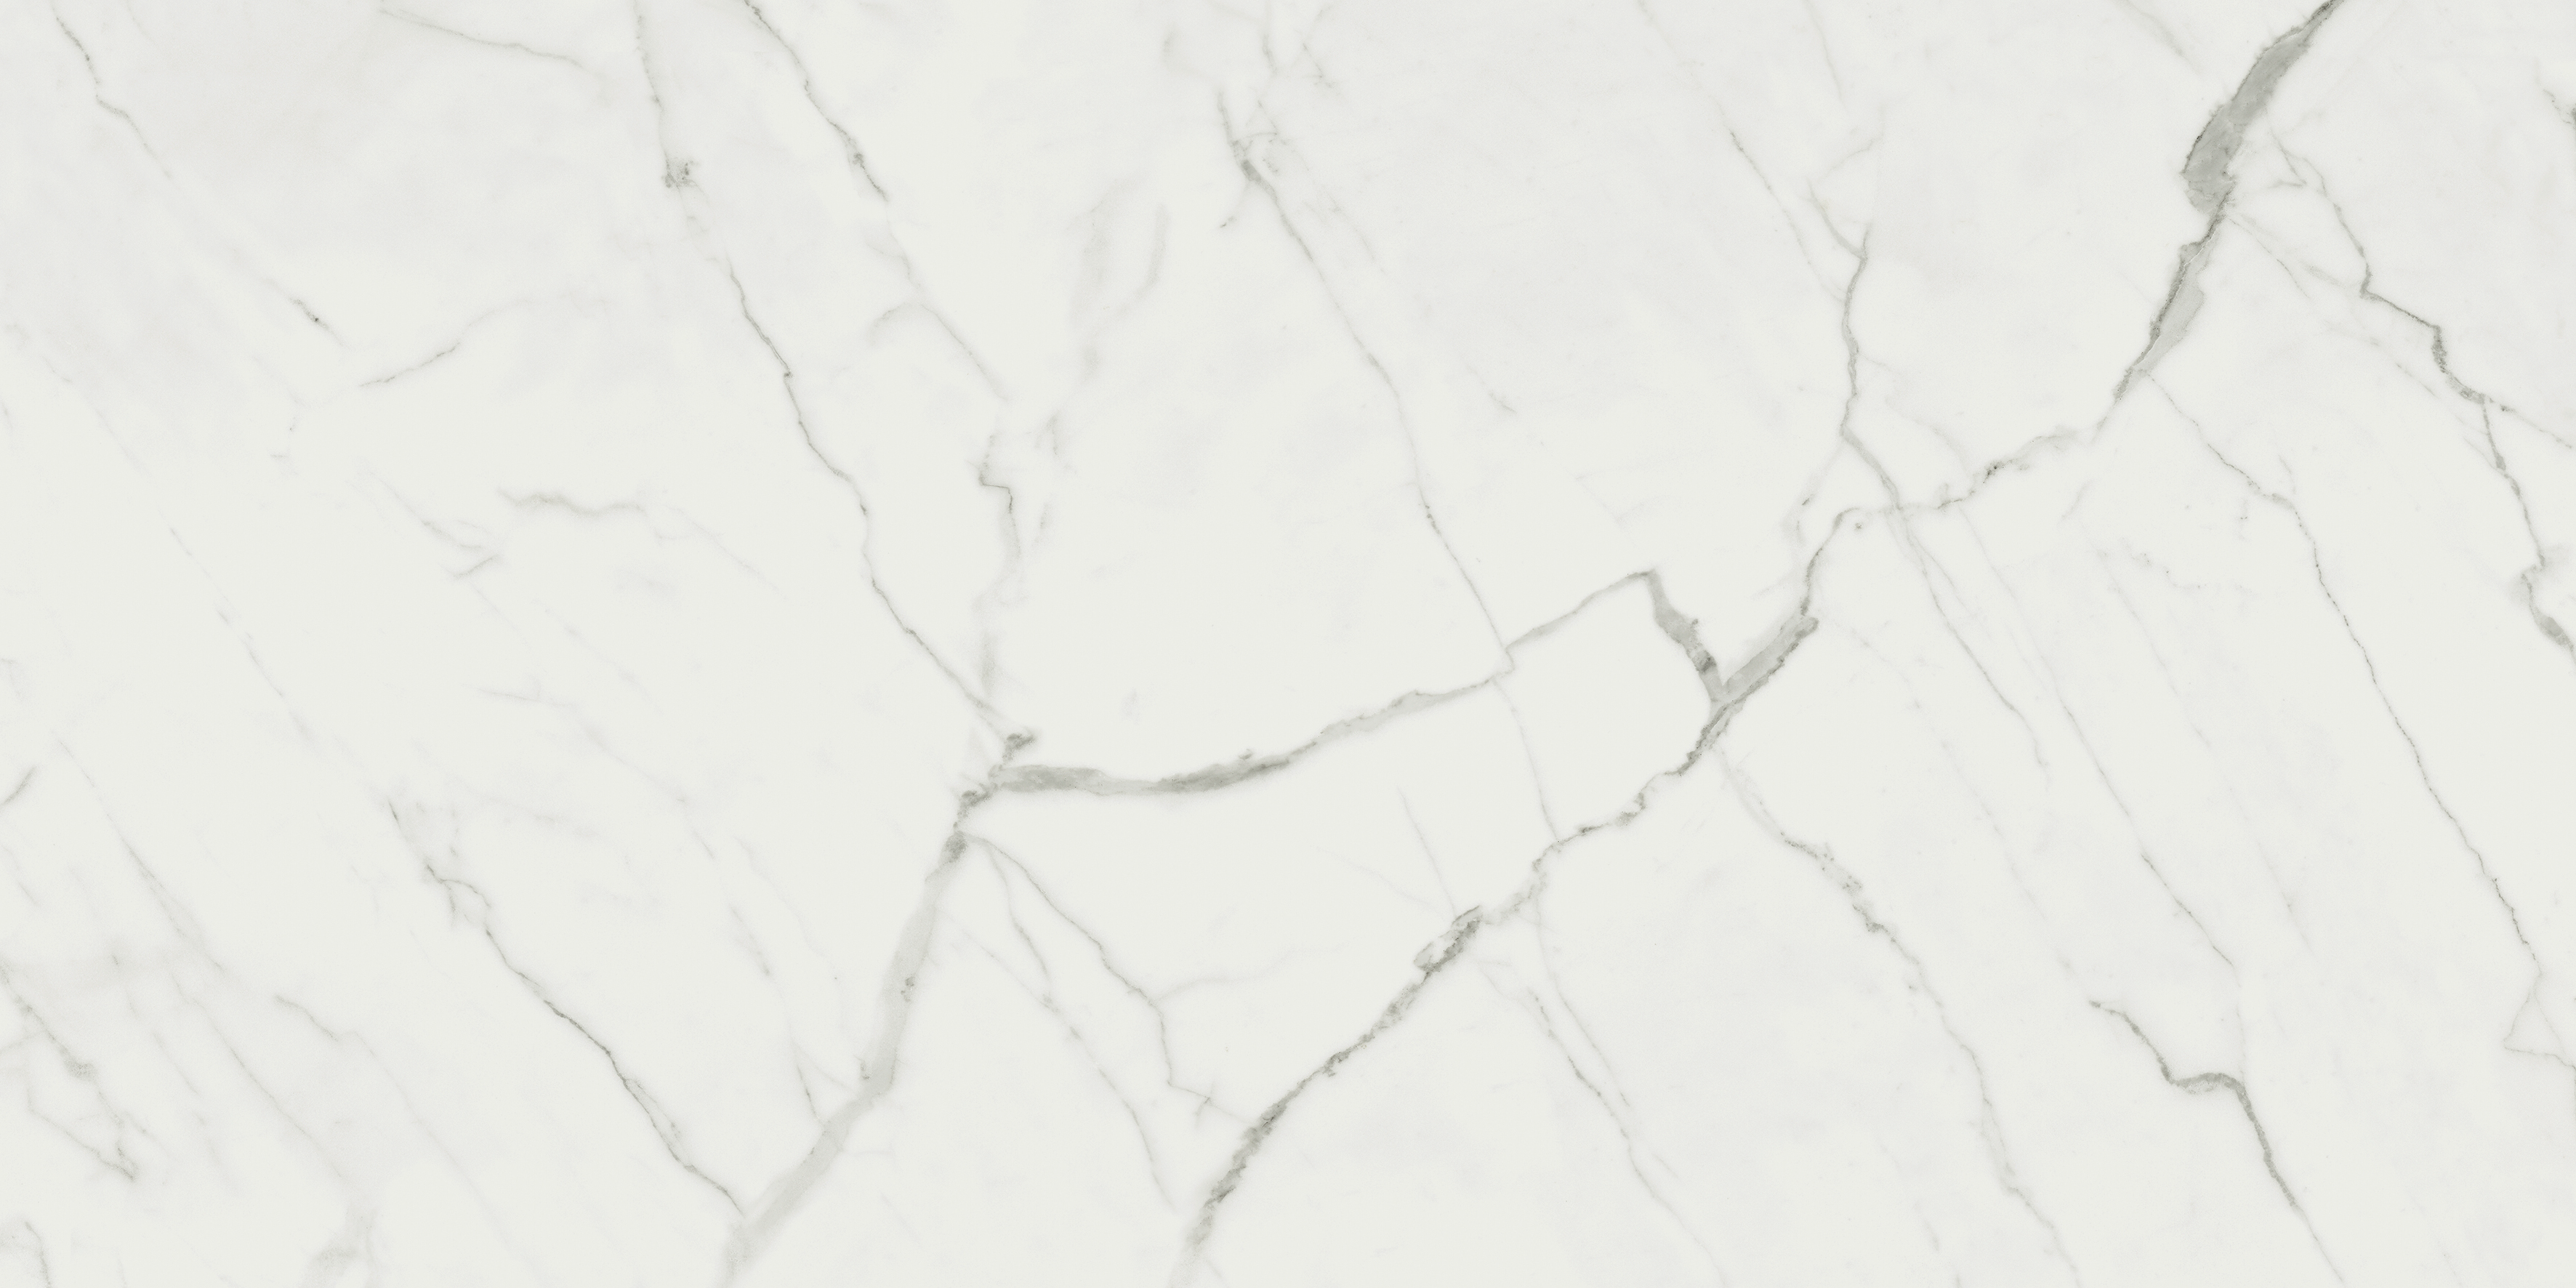 statuario venato pattern glazed porcelain field tile from mayfair anatolia collection distributed by surface group international polished finish rectified edge 24x48 rectangle shape